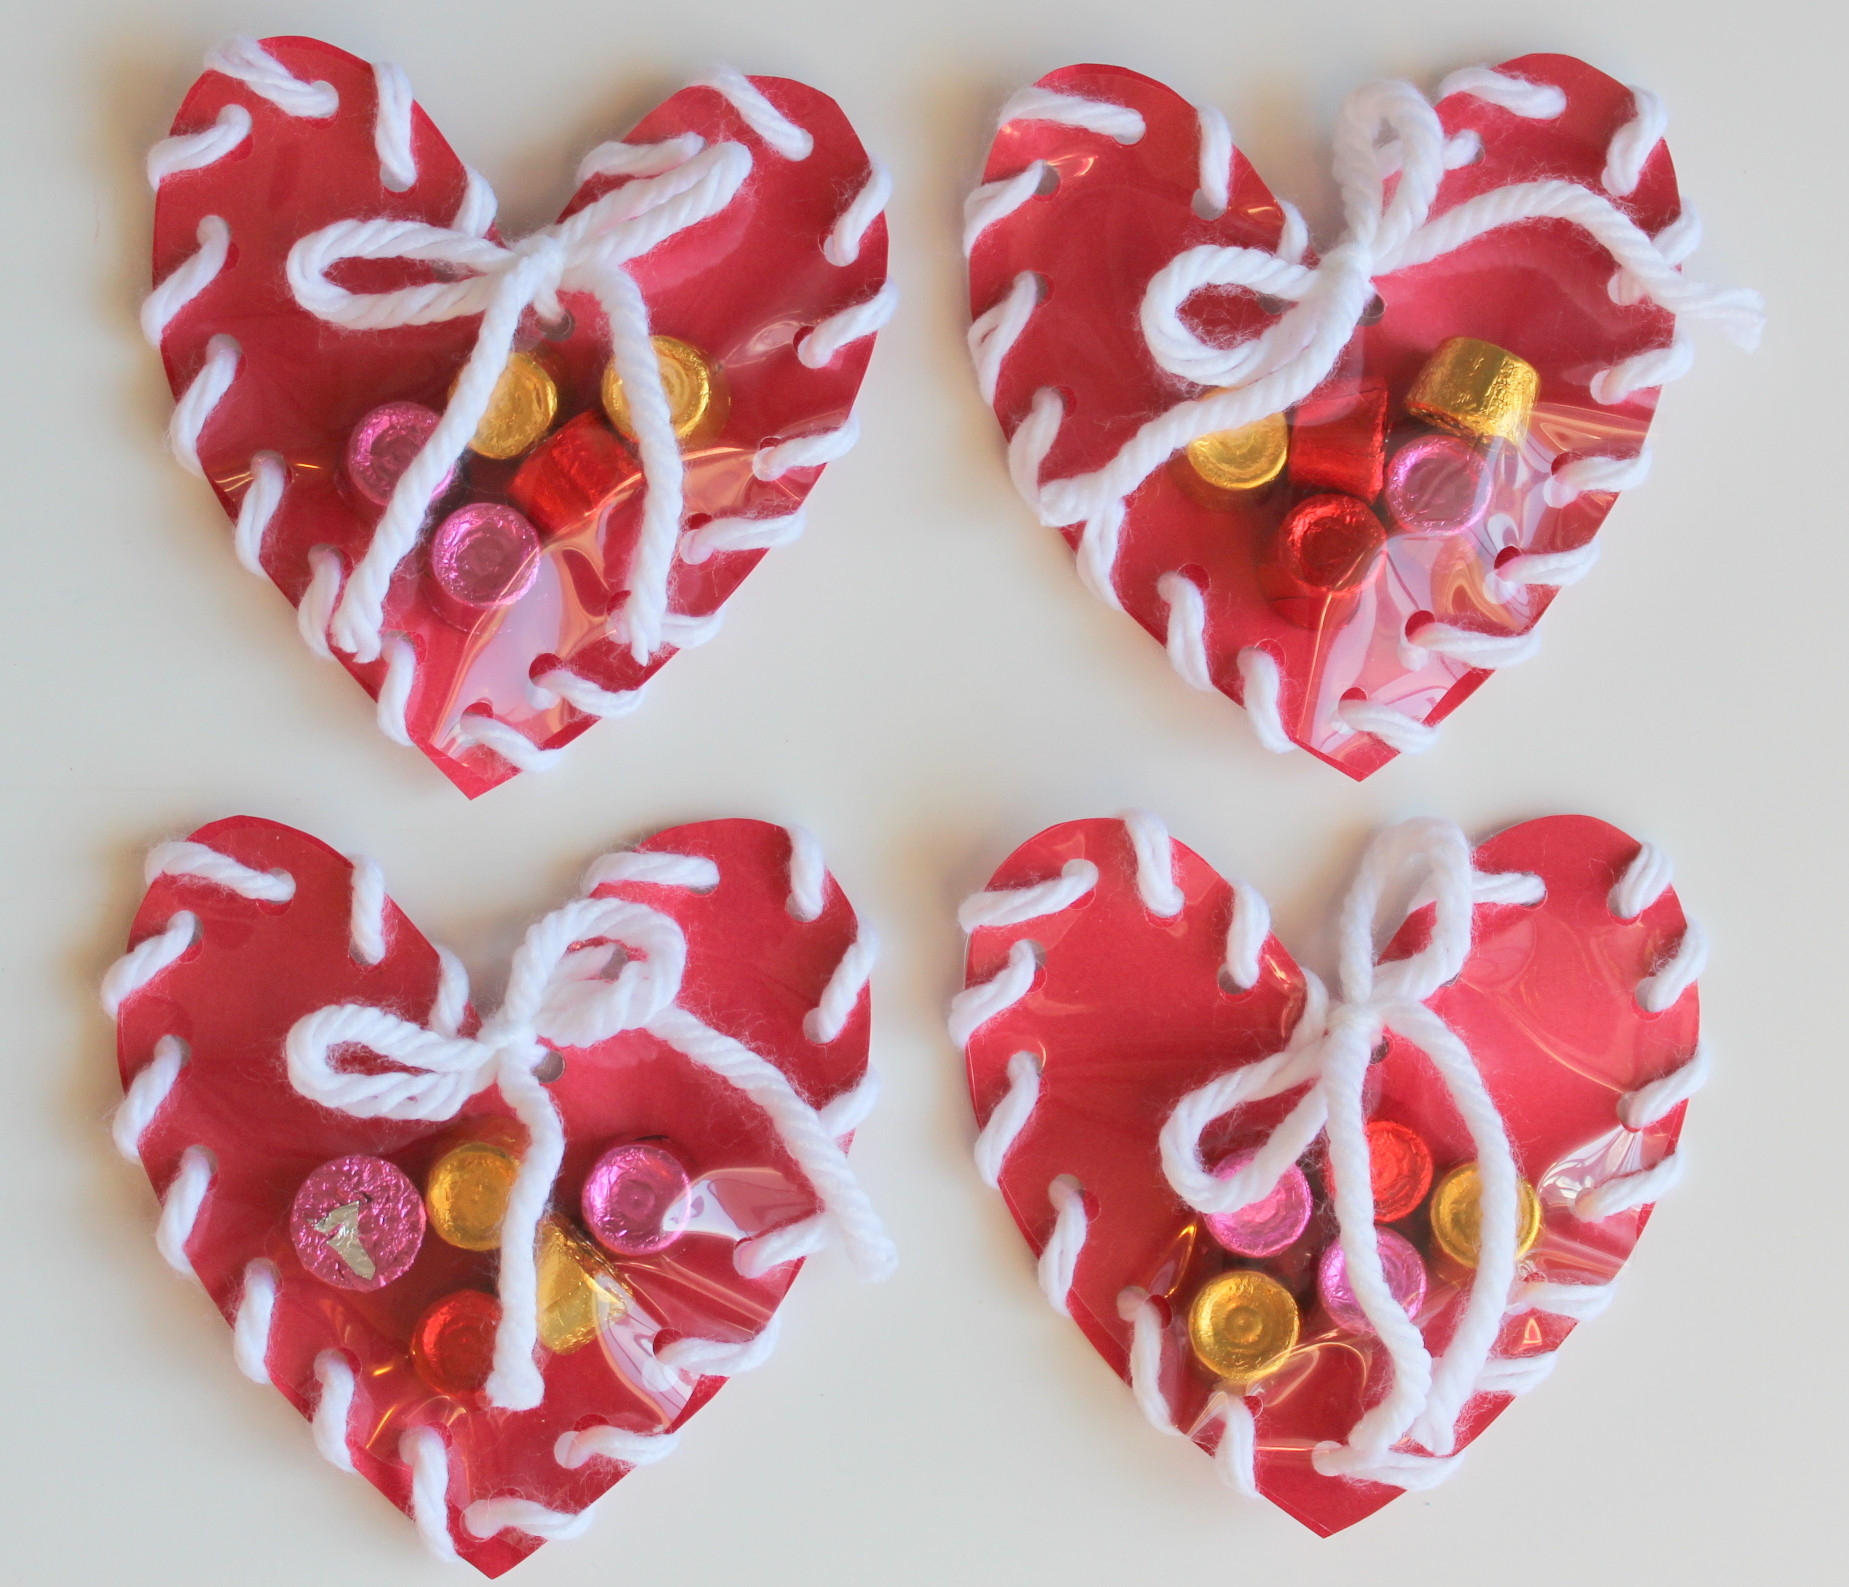 Arts And Crafts Valentines Gift Ideas
 Lollydot Hand Sewn Paper Heart Valentine Craft for Kids